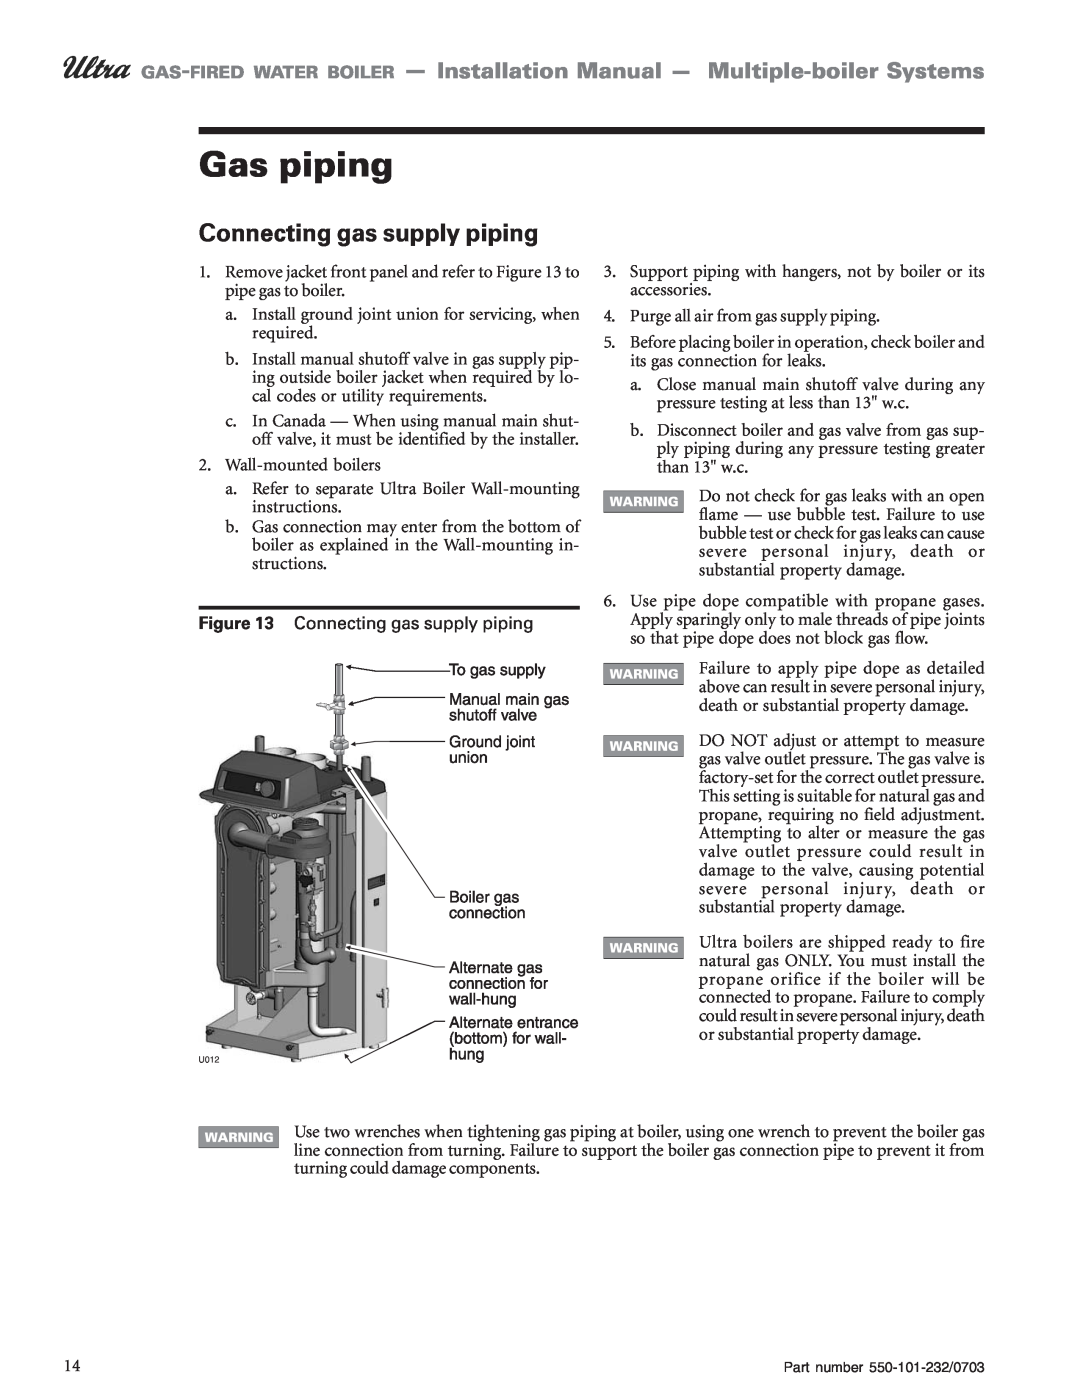 Weil-McLain Boiler installation manual Gas piping, Connecting gas supply piping 